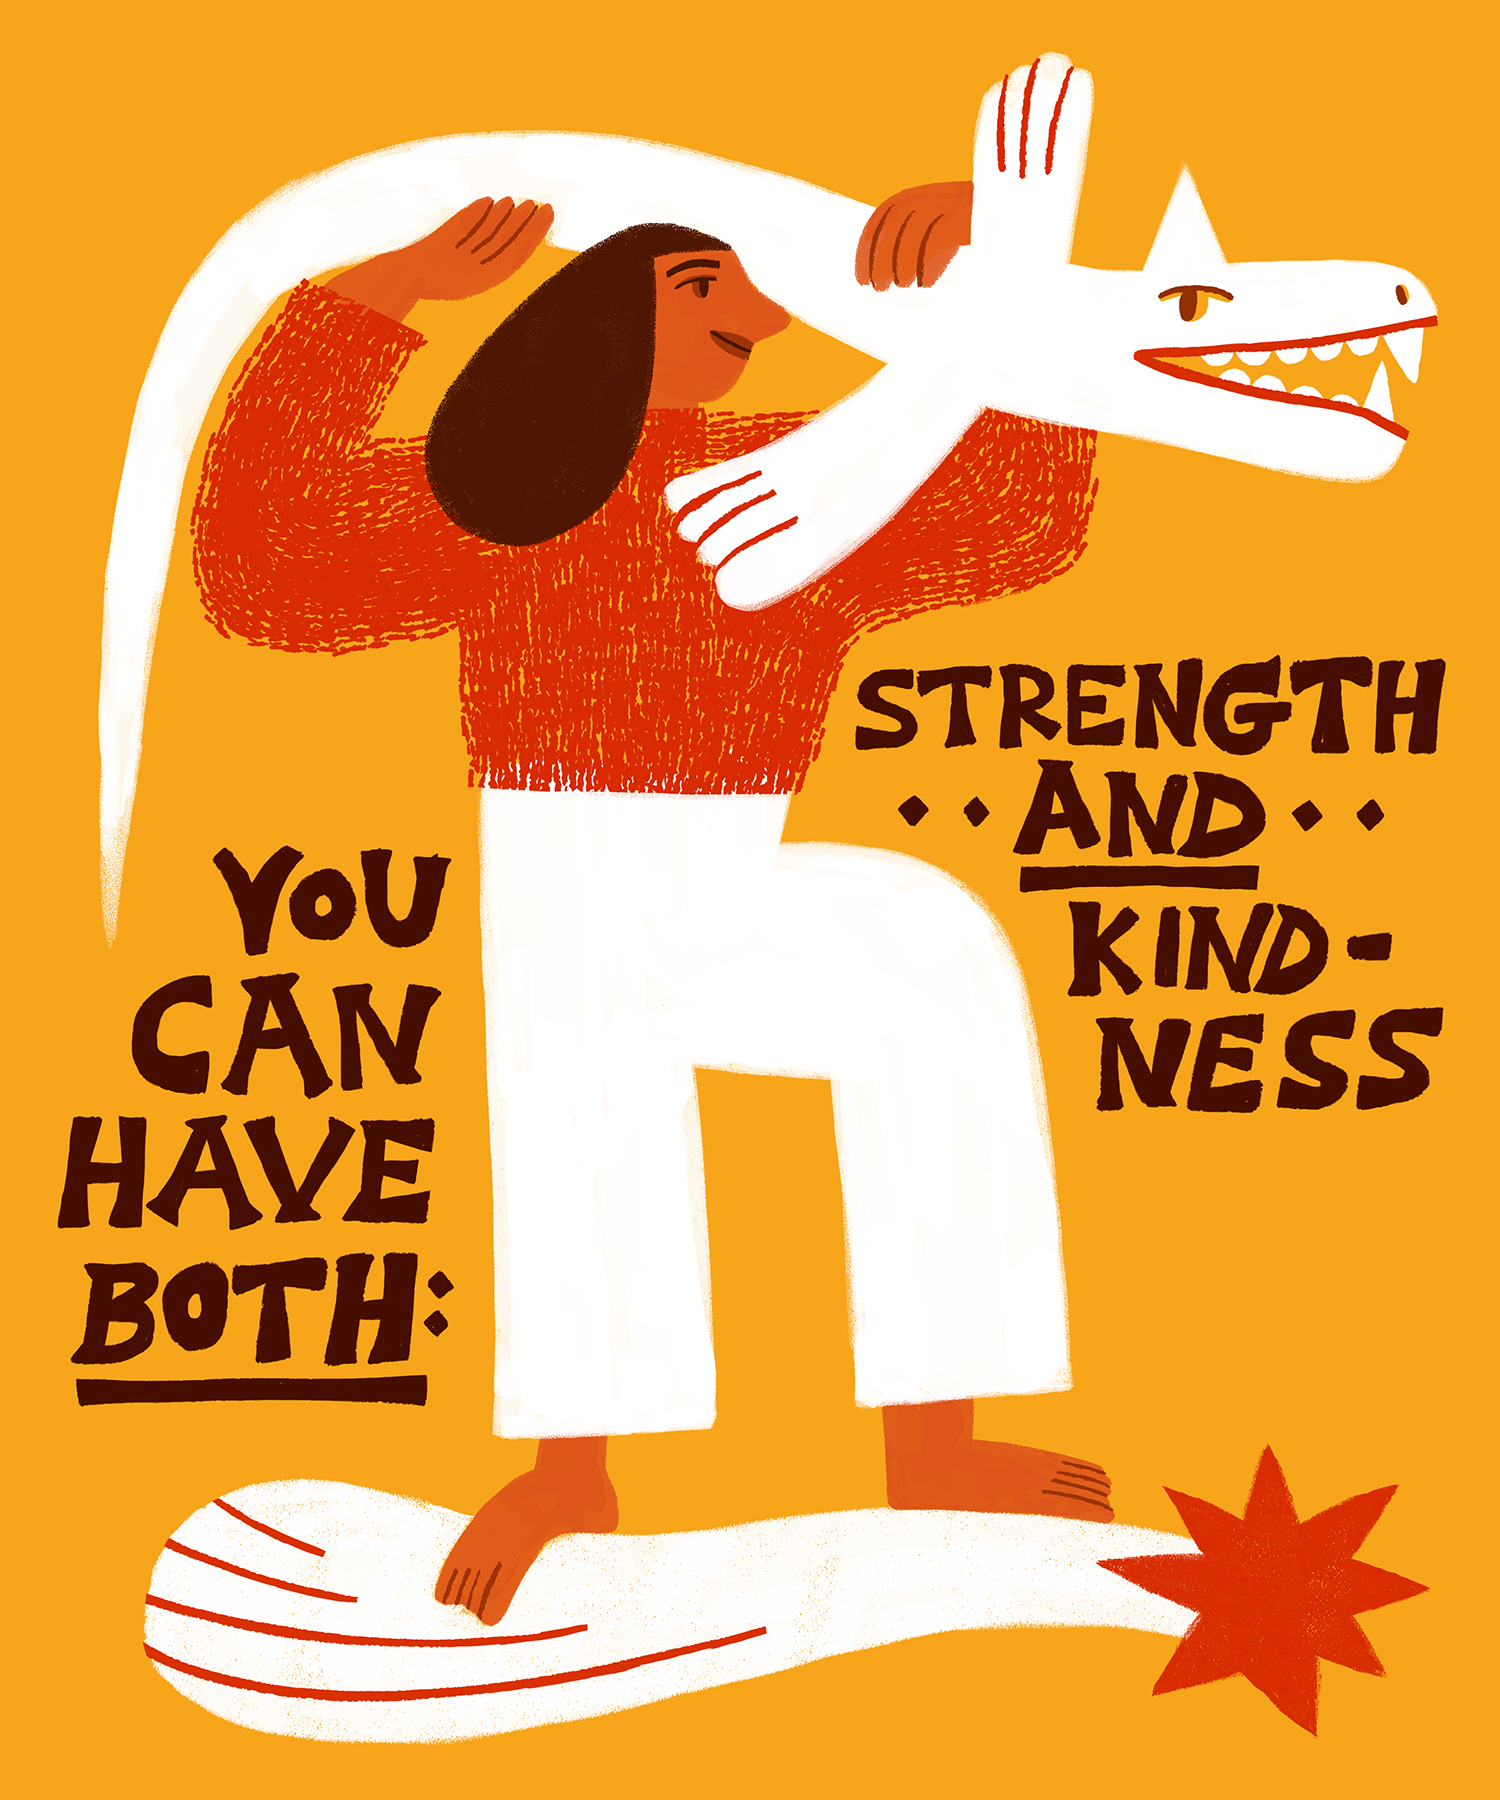 you-can-have-both-strength-and-kindness-woman-dragon-illustration-violeta-noy